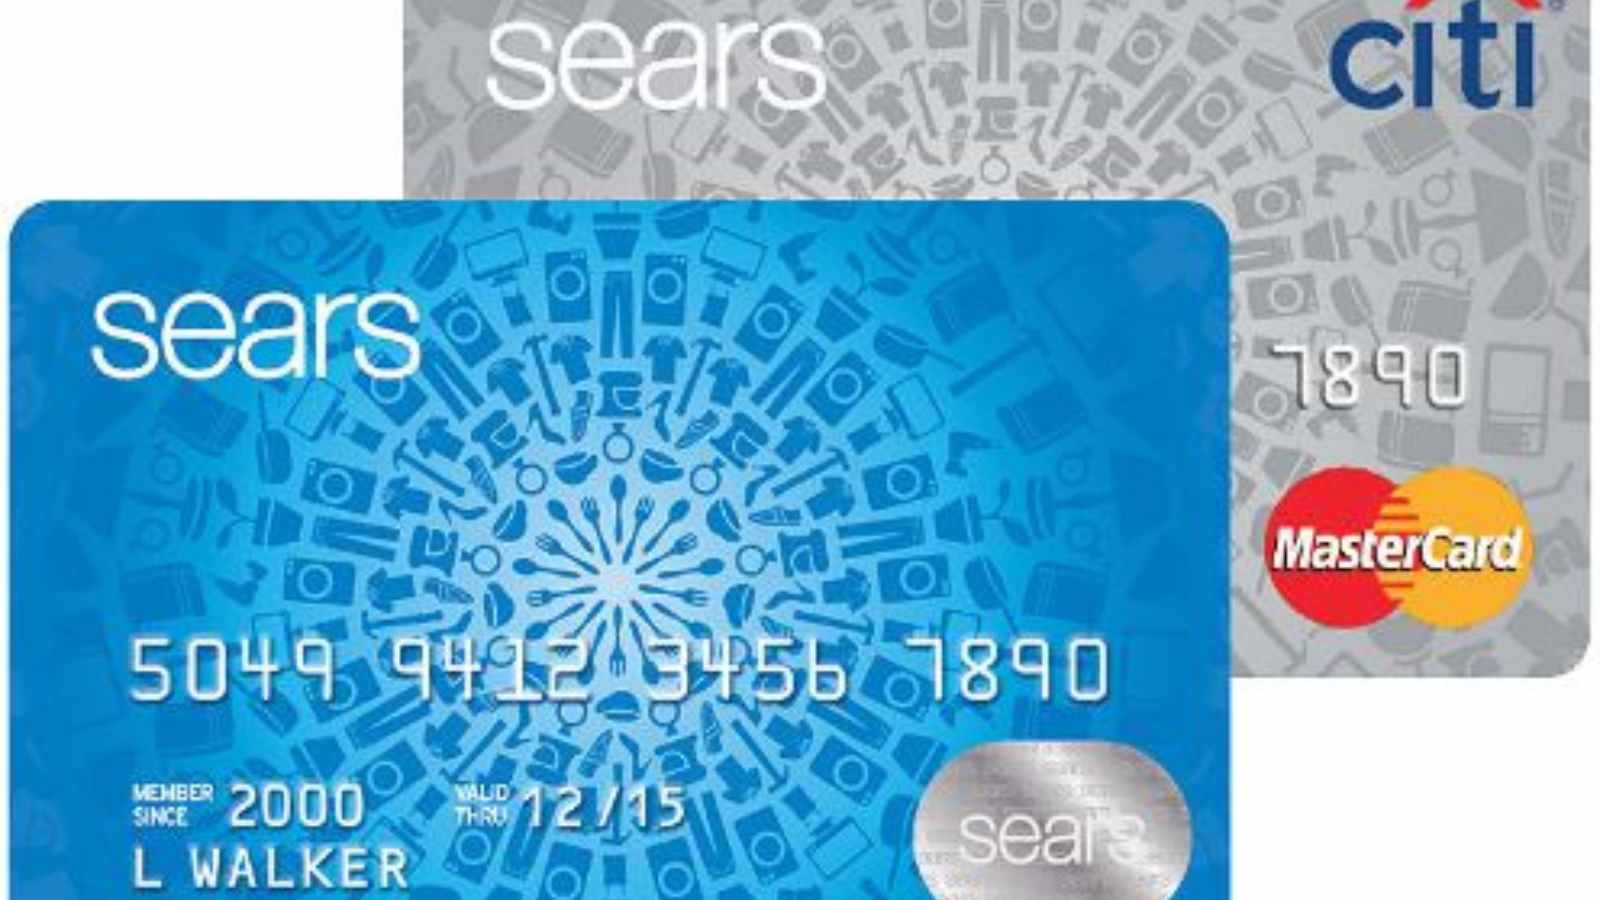 Sears Credit Card Activation: Steps to activate, Payment Methods, Benefits, Alternatives, and More